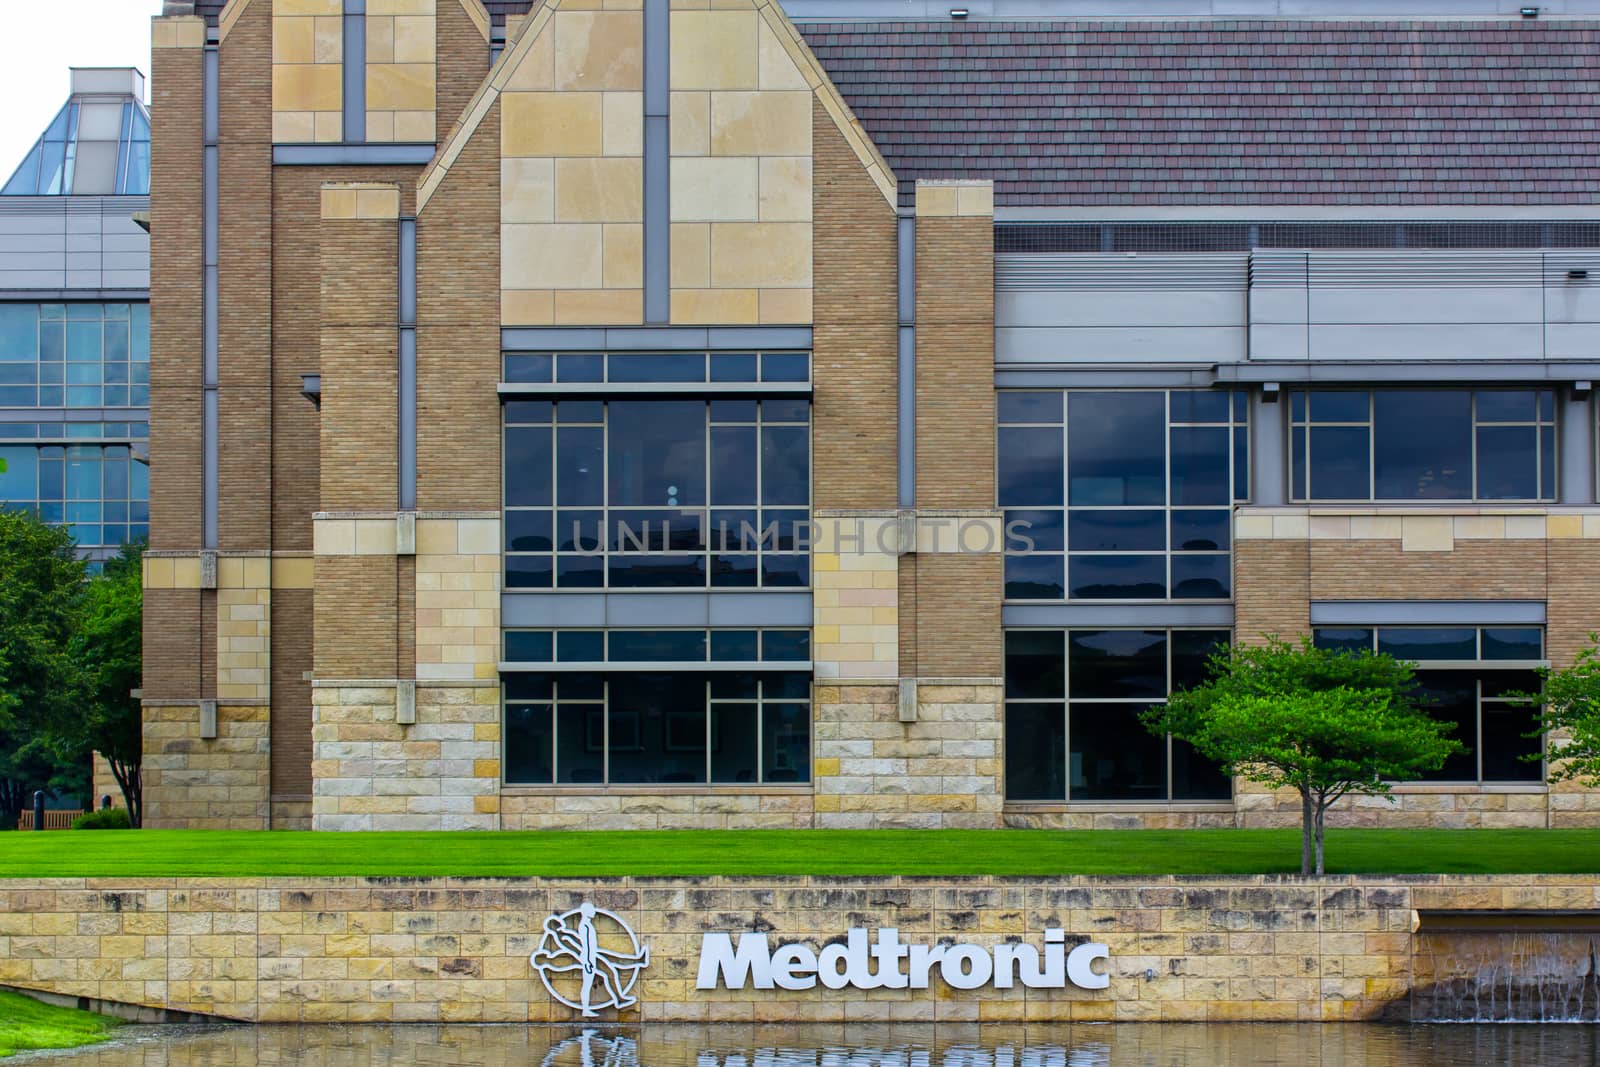 FRIDLEY, MN/USA - JUNE 23, 2014: Medtronic corporate headquarters campus. Medtronicis the world's fourth largest medical device company and is a Fortune 500 company.